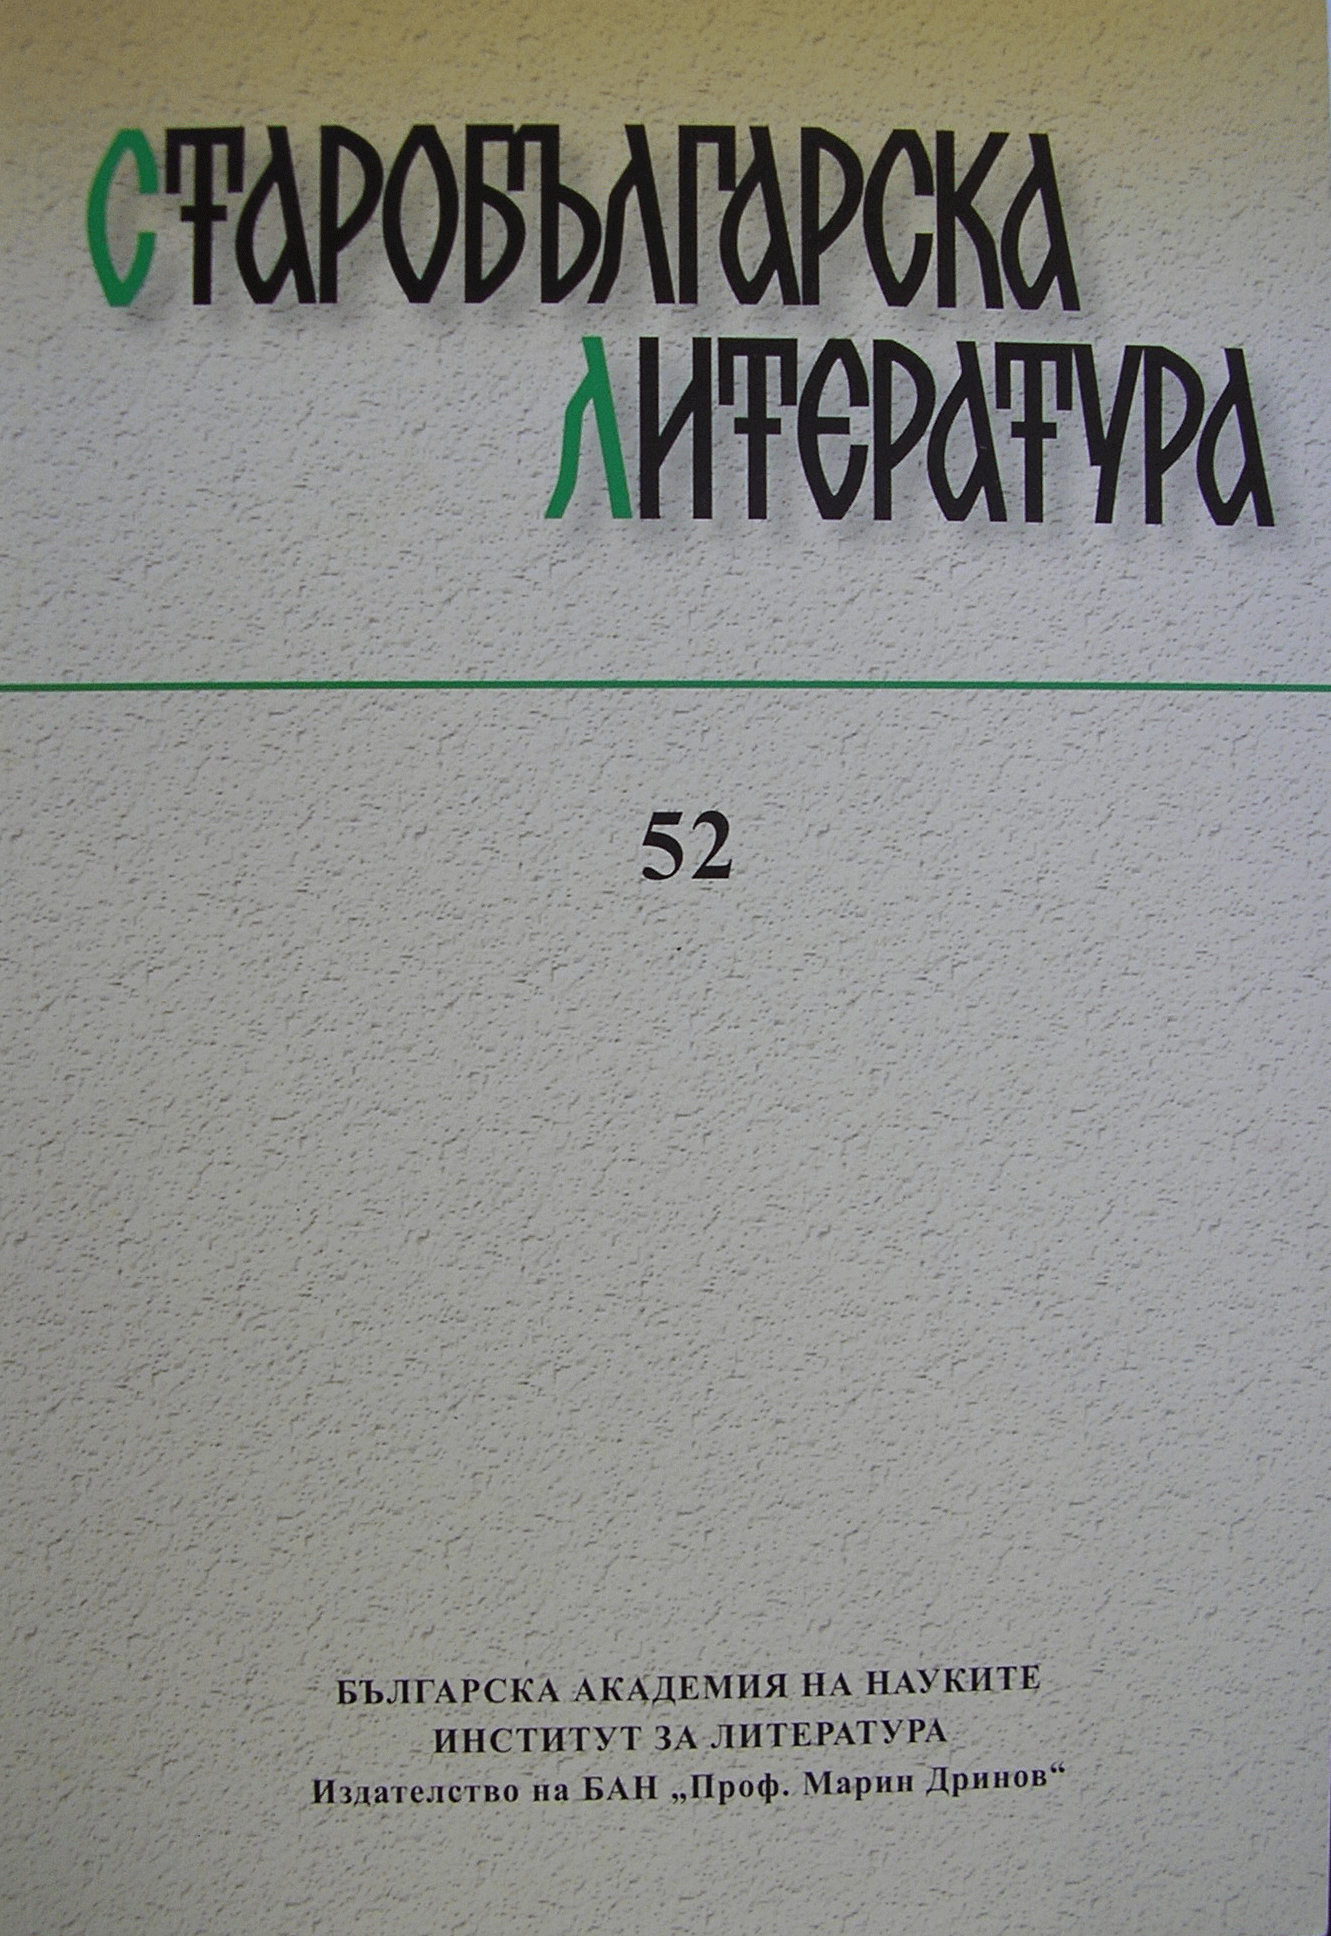 The Zographou Electronic Research Library at the Sofia University St. Kliment Ohridski Cover Image